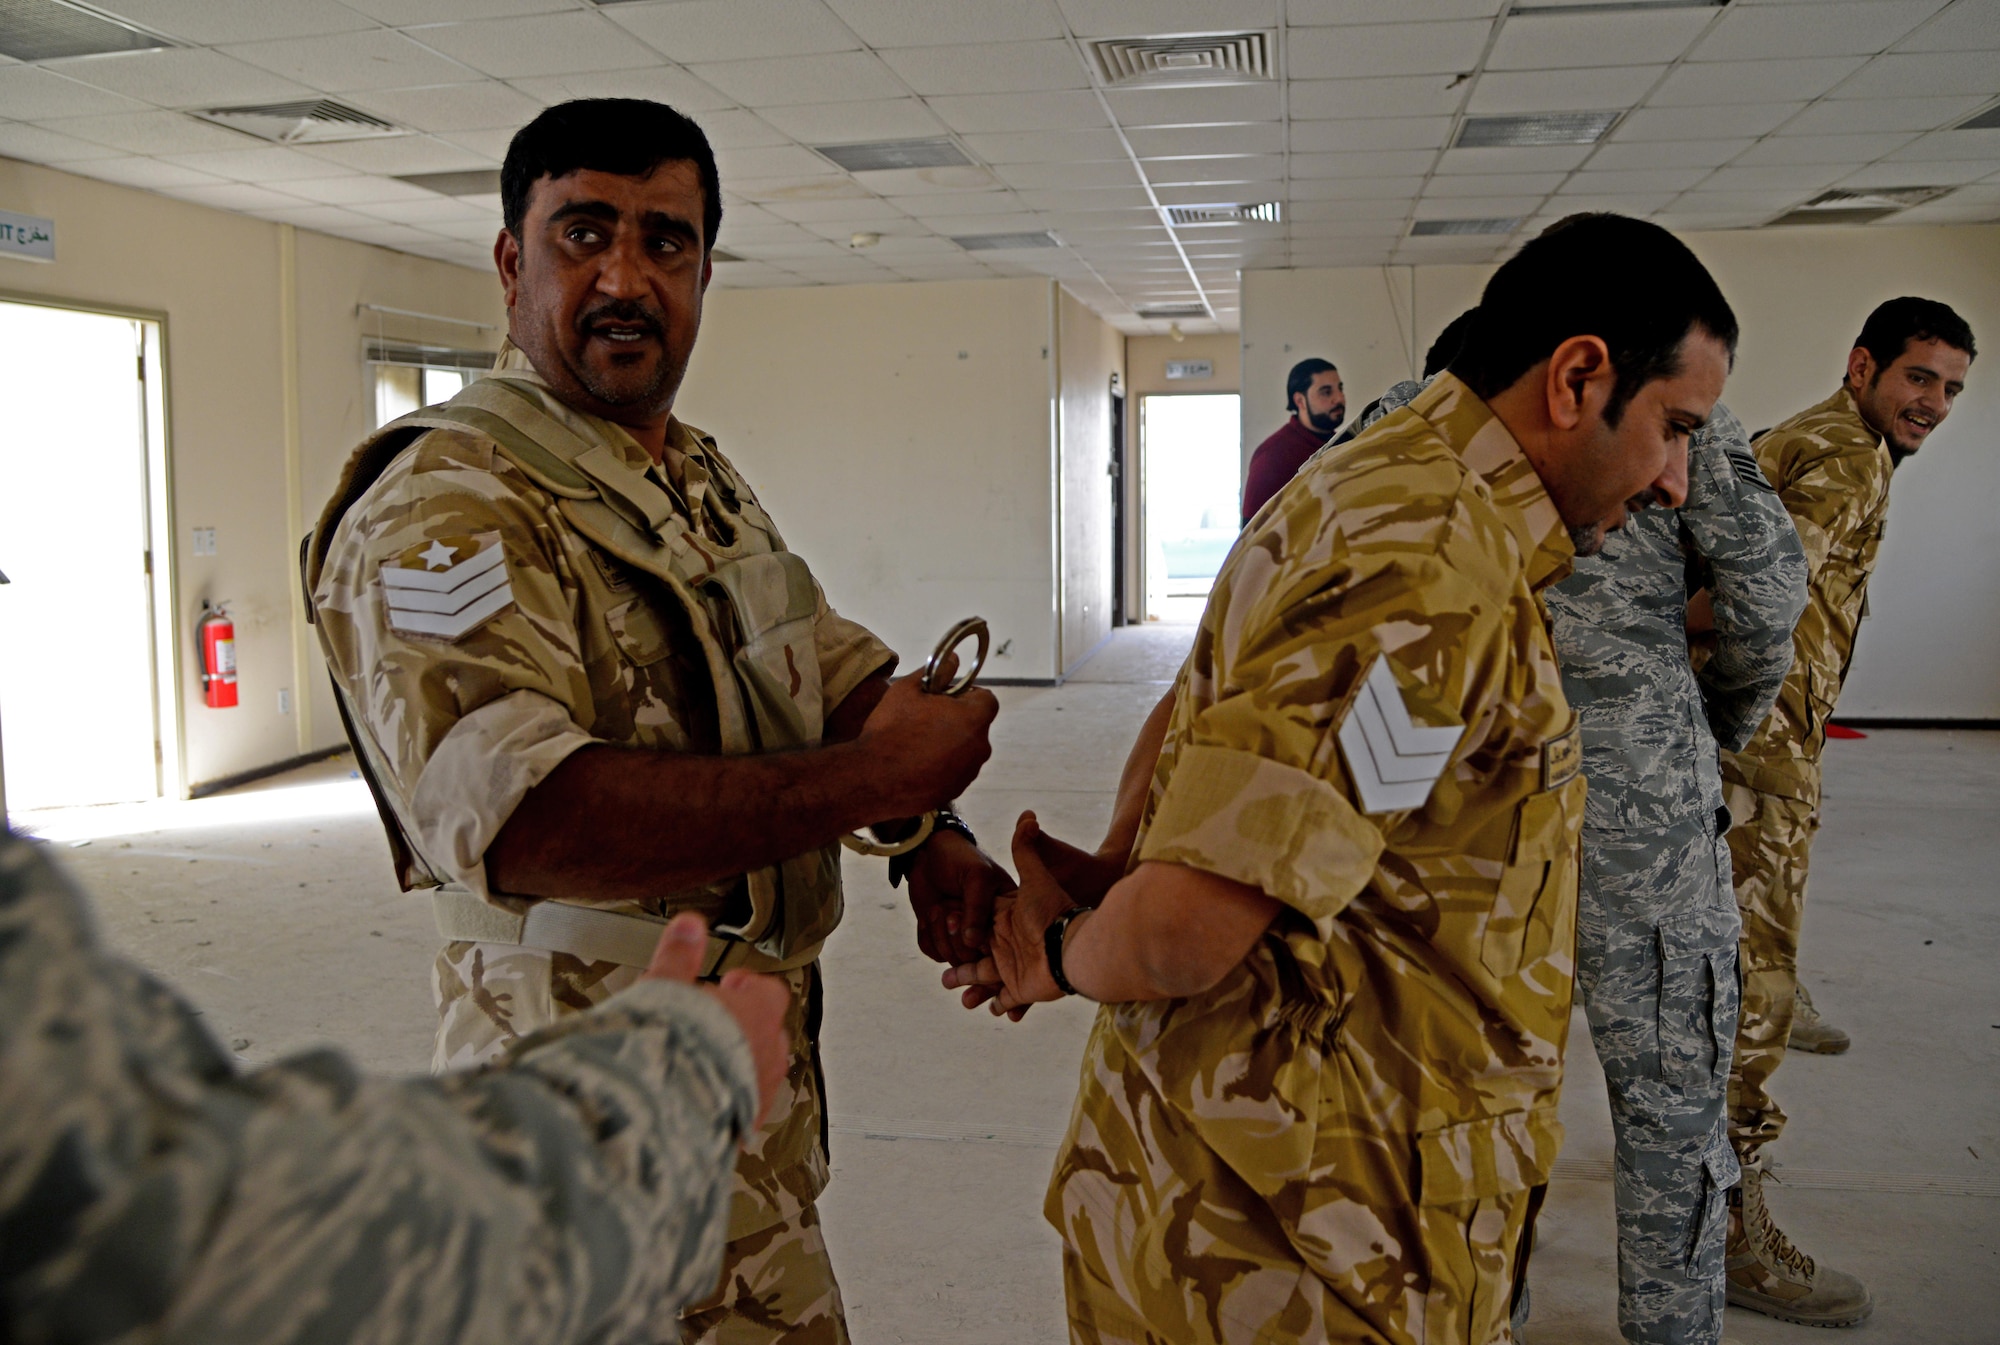 Members of the Qatar Emiri Air Force practice handcuffing techniques during joint interoperability training April 14, 2015, at Al Udeid Air Base, Qatar. Airmen from the 379th Expeditionary Security Forces Squadron shared techniques and procedures with members of the QEAF during this joint training. Training like this enhances the interoperability of both the U.S. and its host nation partners and helps improve bilateral relations by sharing techniques on how each country operates. (U.S. Air Force photo by Senior Airman Kia Atkins)